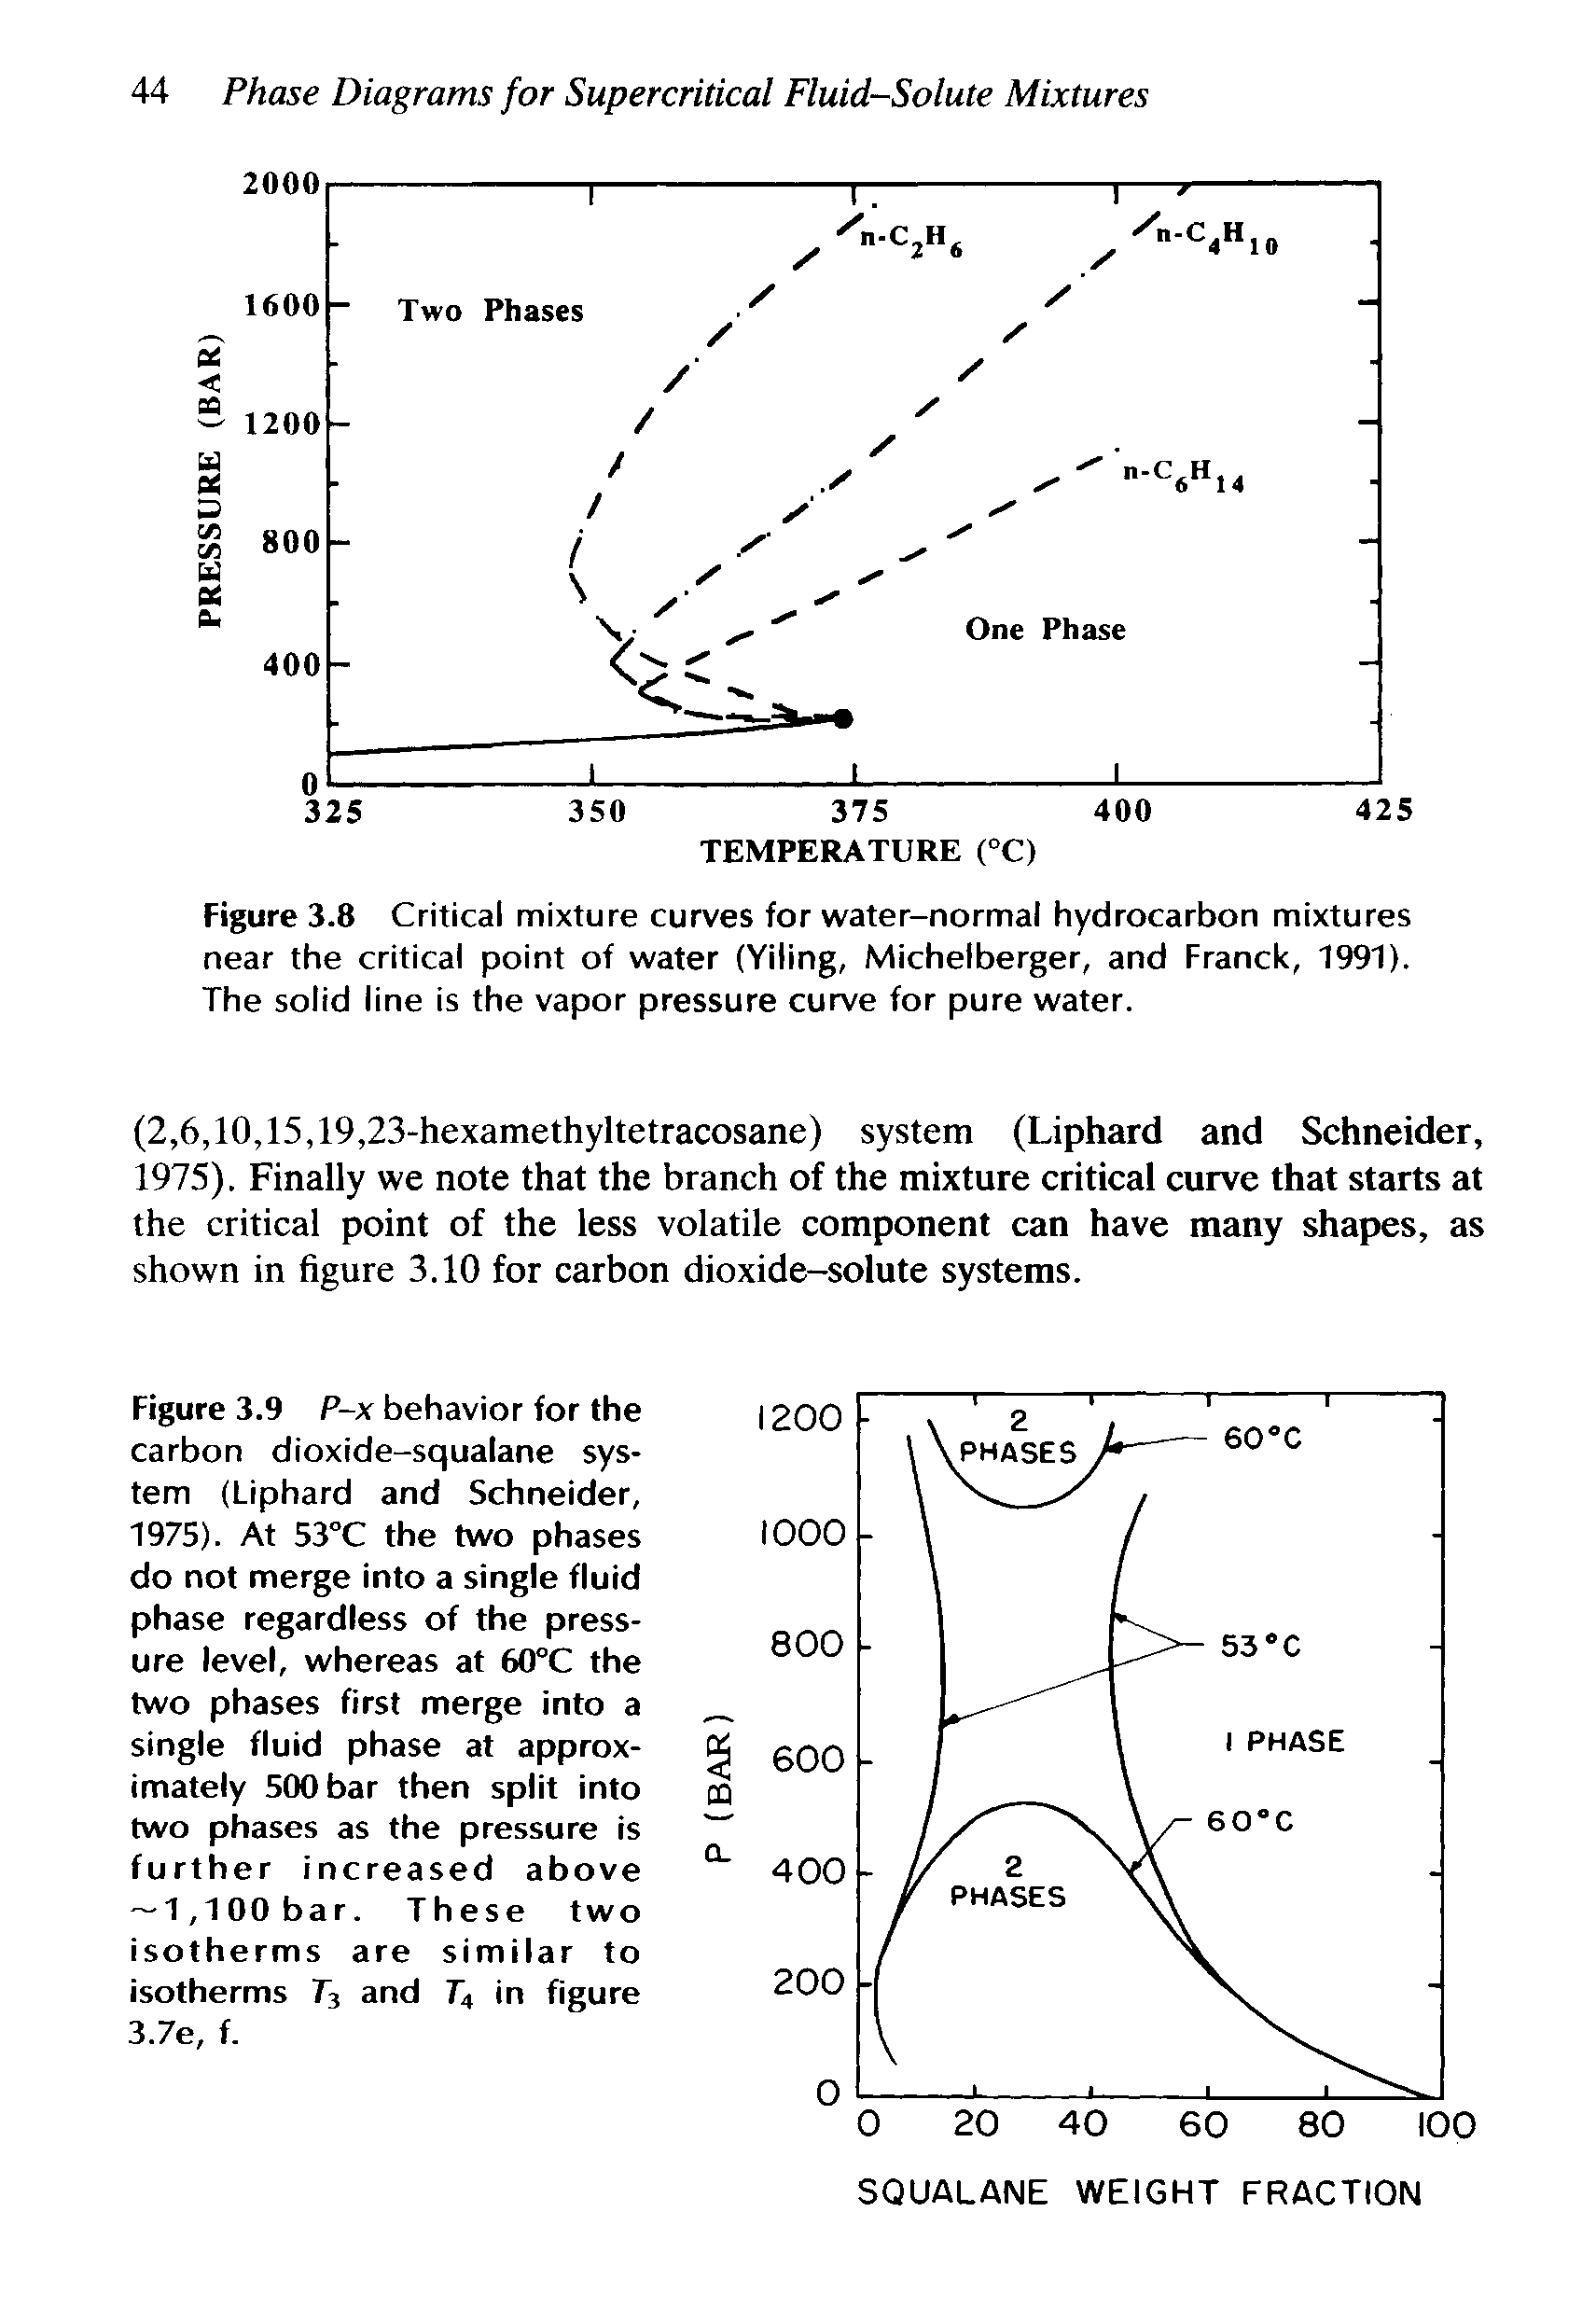 Figure 3.9 P-x behavior for the carbon dioxide-squalane system (Liphard and Schneider, 1975). At 53°C the two phases do not merge into a single fluid phase regardless of the pressure level, whereas at 60°C the two phases first merge into a single fluid phase at approximately 500 bar then split into two phases as the pressure is further increased above 1,100bar. These two isotherms are similar to isotherms and T4 in figure 3.7e, f.